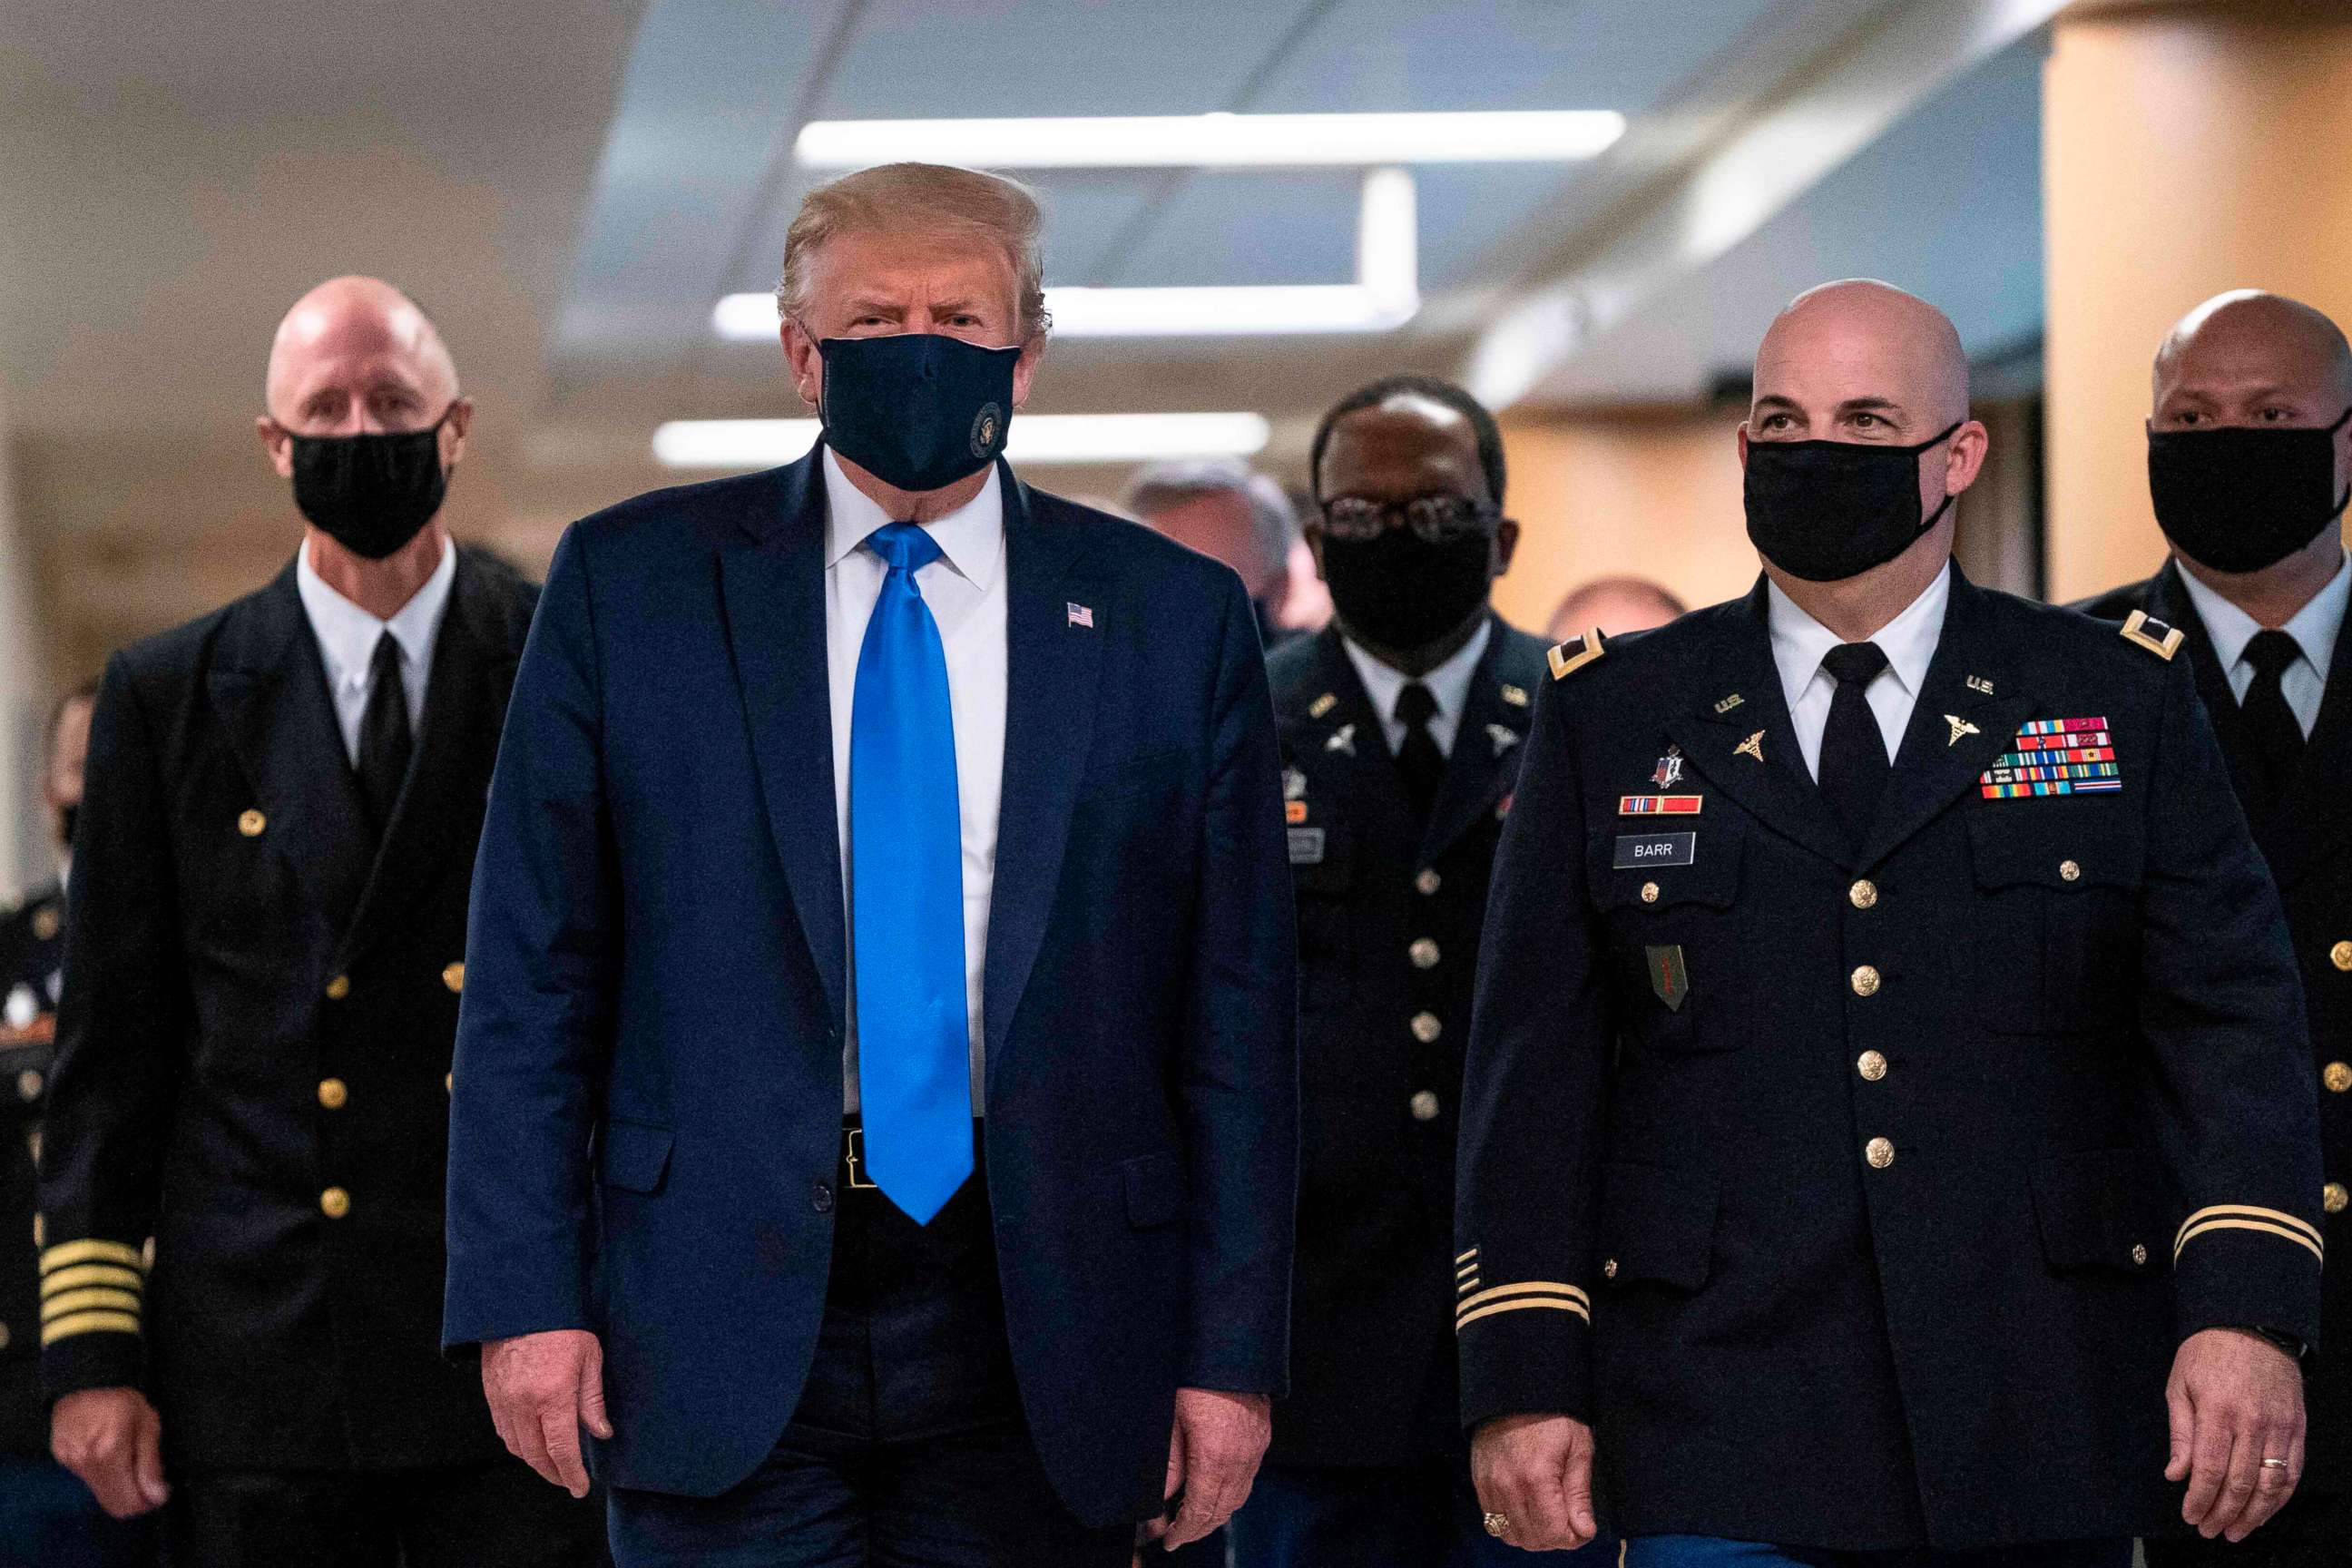 PHOTO: President Donald Trump wears a mask as he visits Walter Reed National Military Medical Center in Bethesda, Md., July 11, 2020.